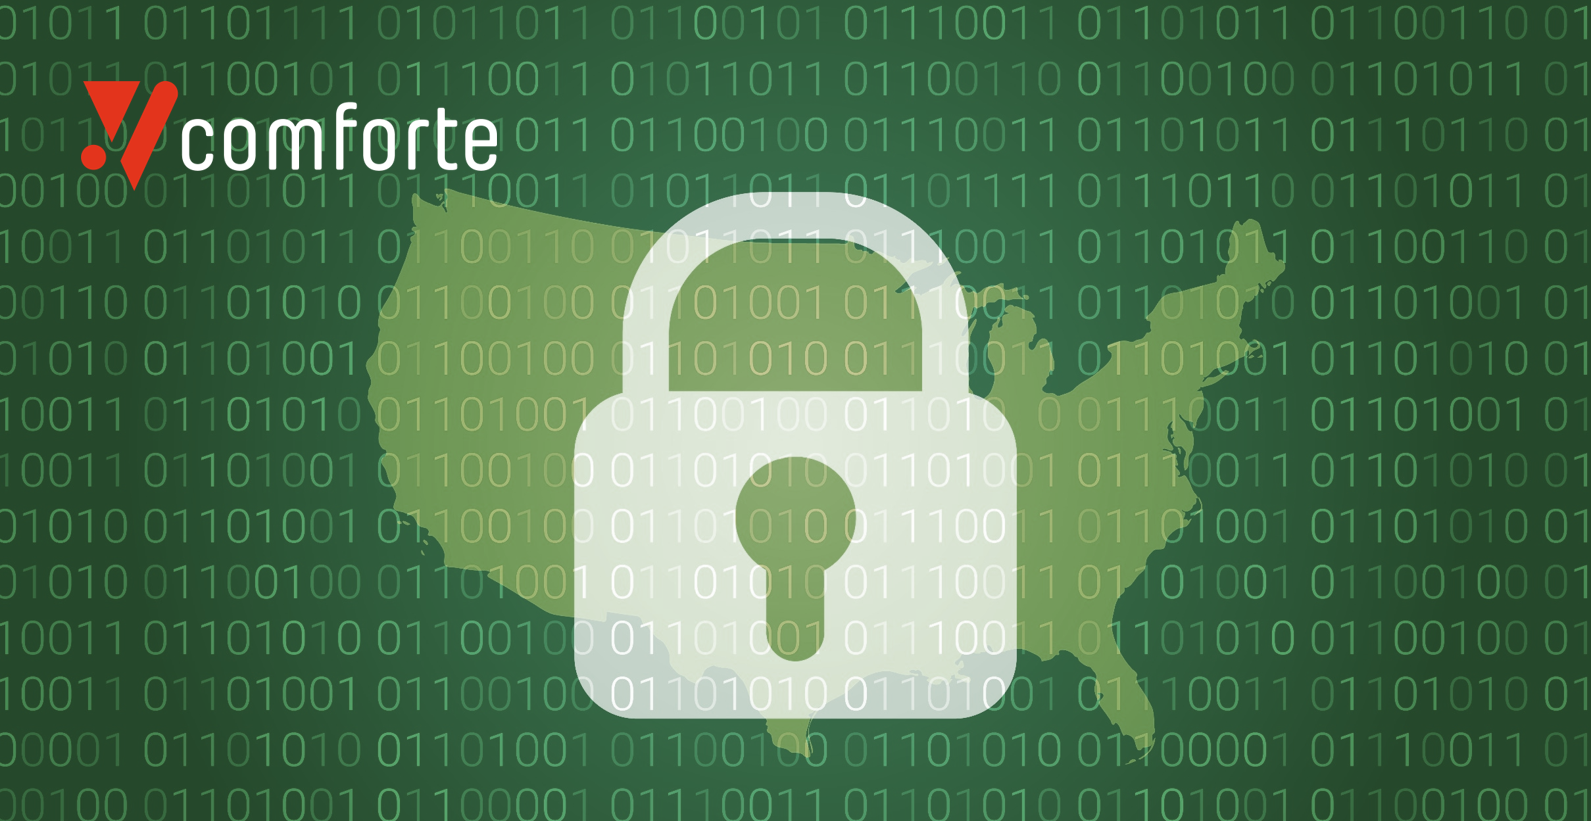 comforte AG - What America’s Federal Privacy Bill Means for Data Protection